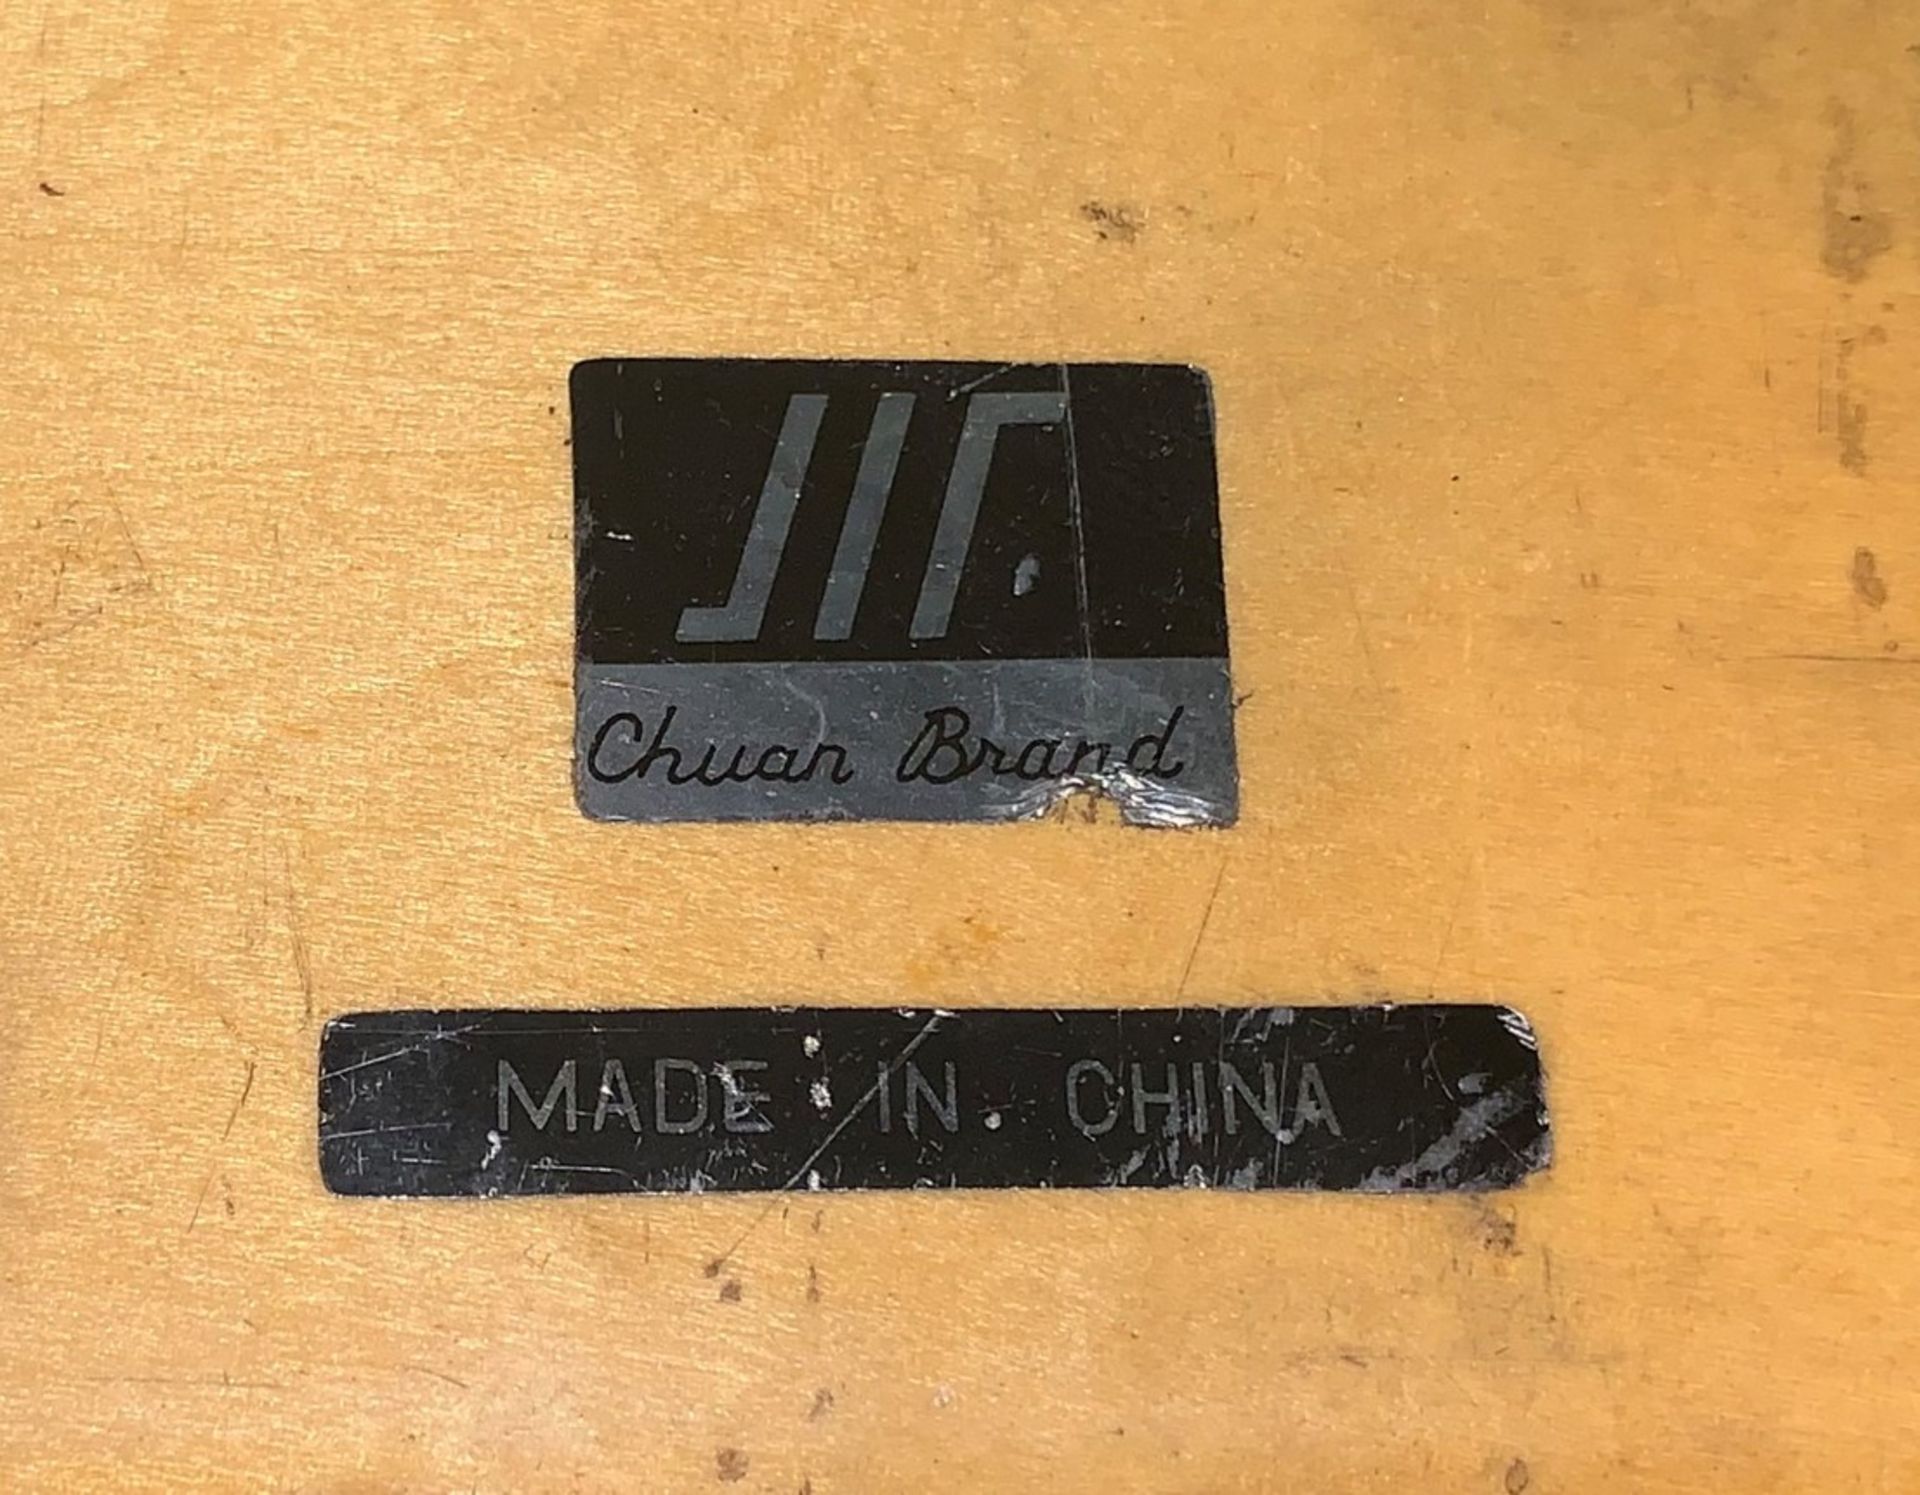 Chuan Brand 5" to 6" Micrometer - Image 4 of 4